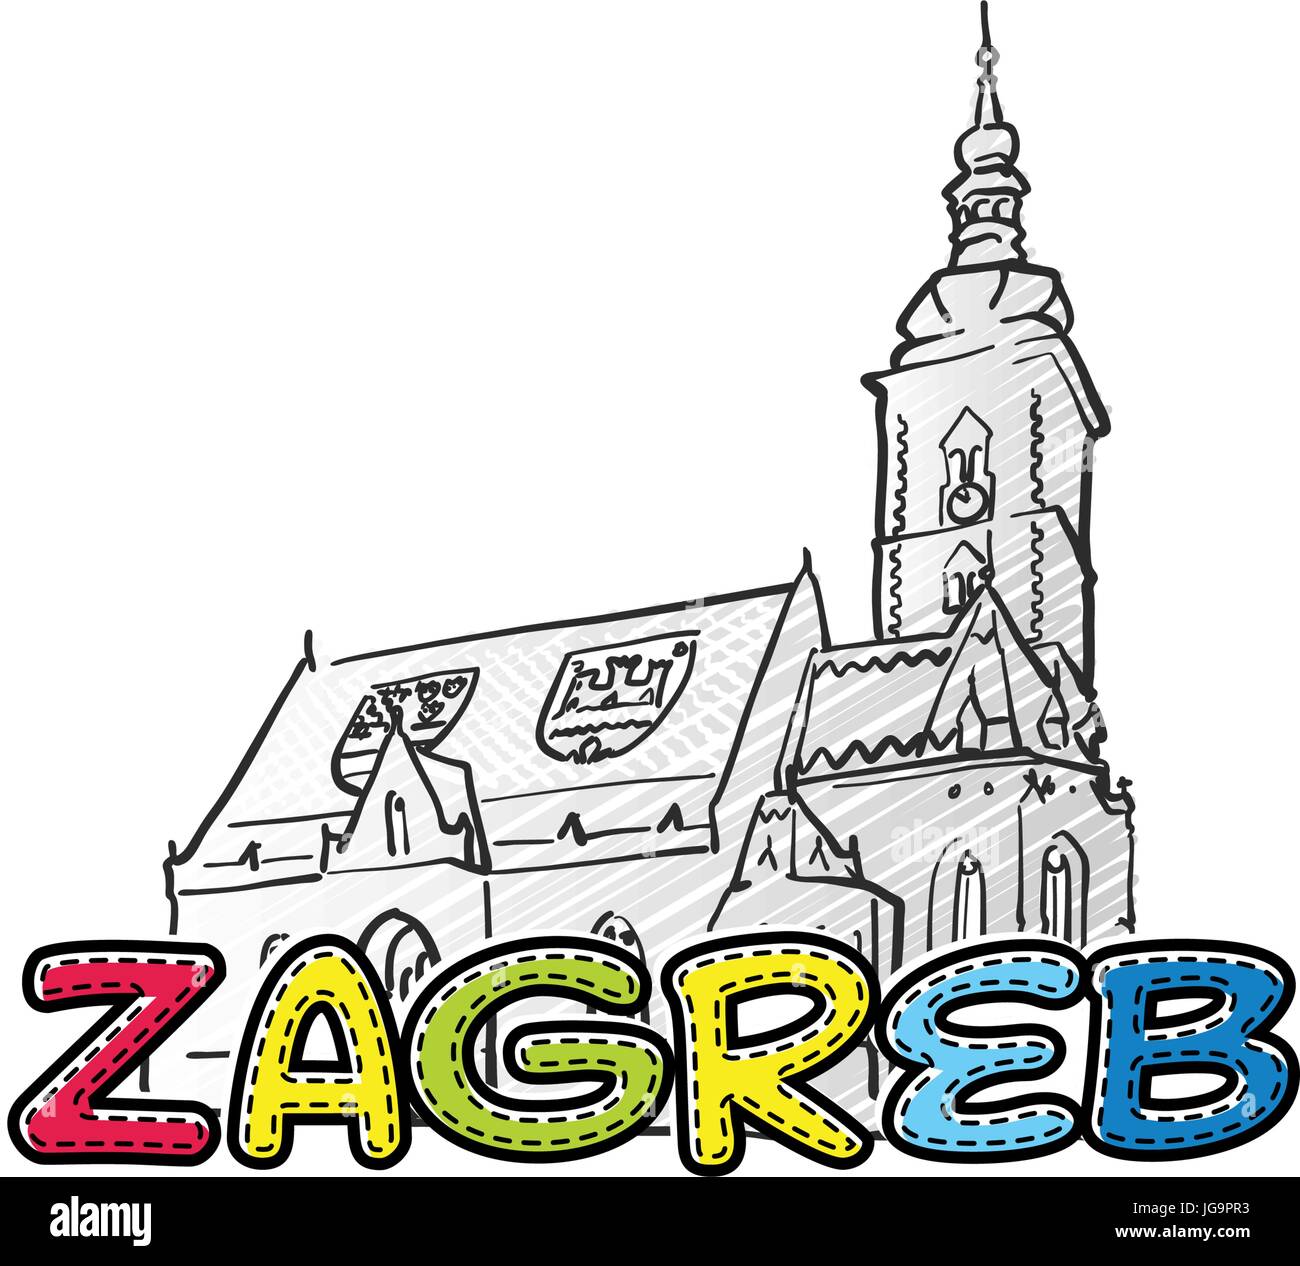 Zagreb beautiful sketched icon, famaous hand-drawn landmark, city name lettering, vector illustration Stock Vector